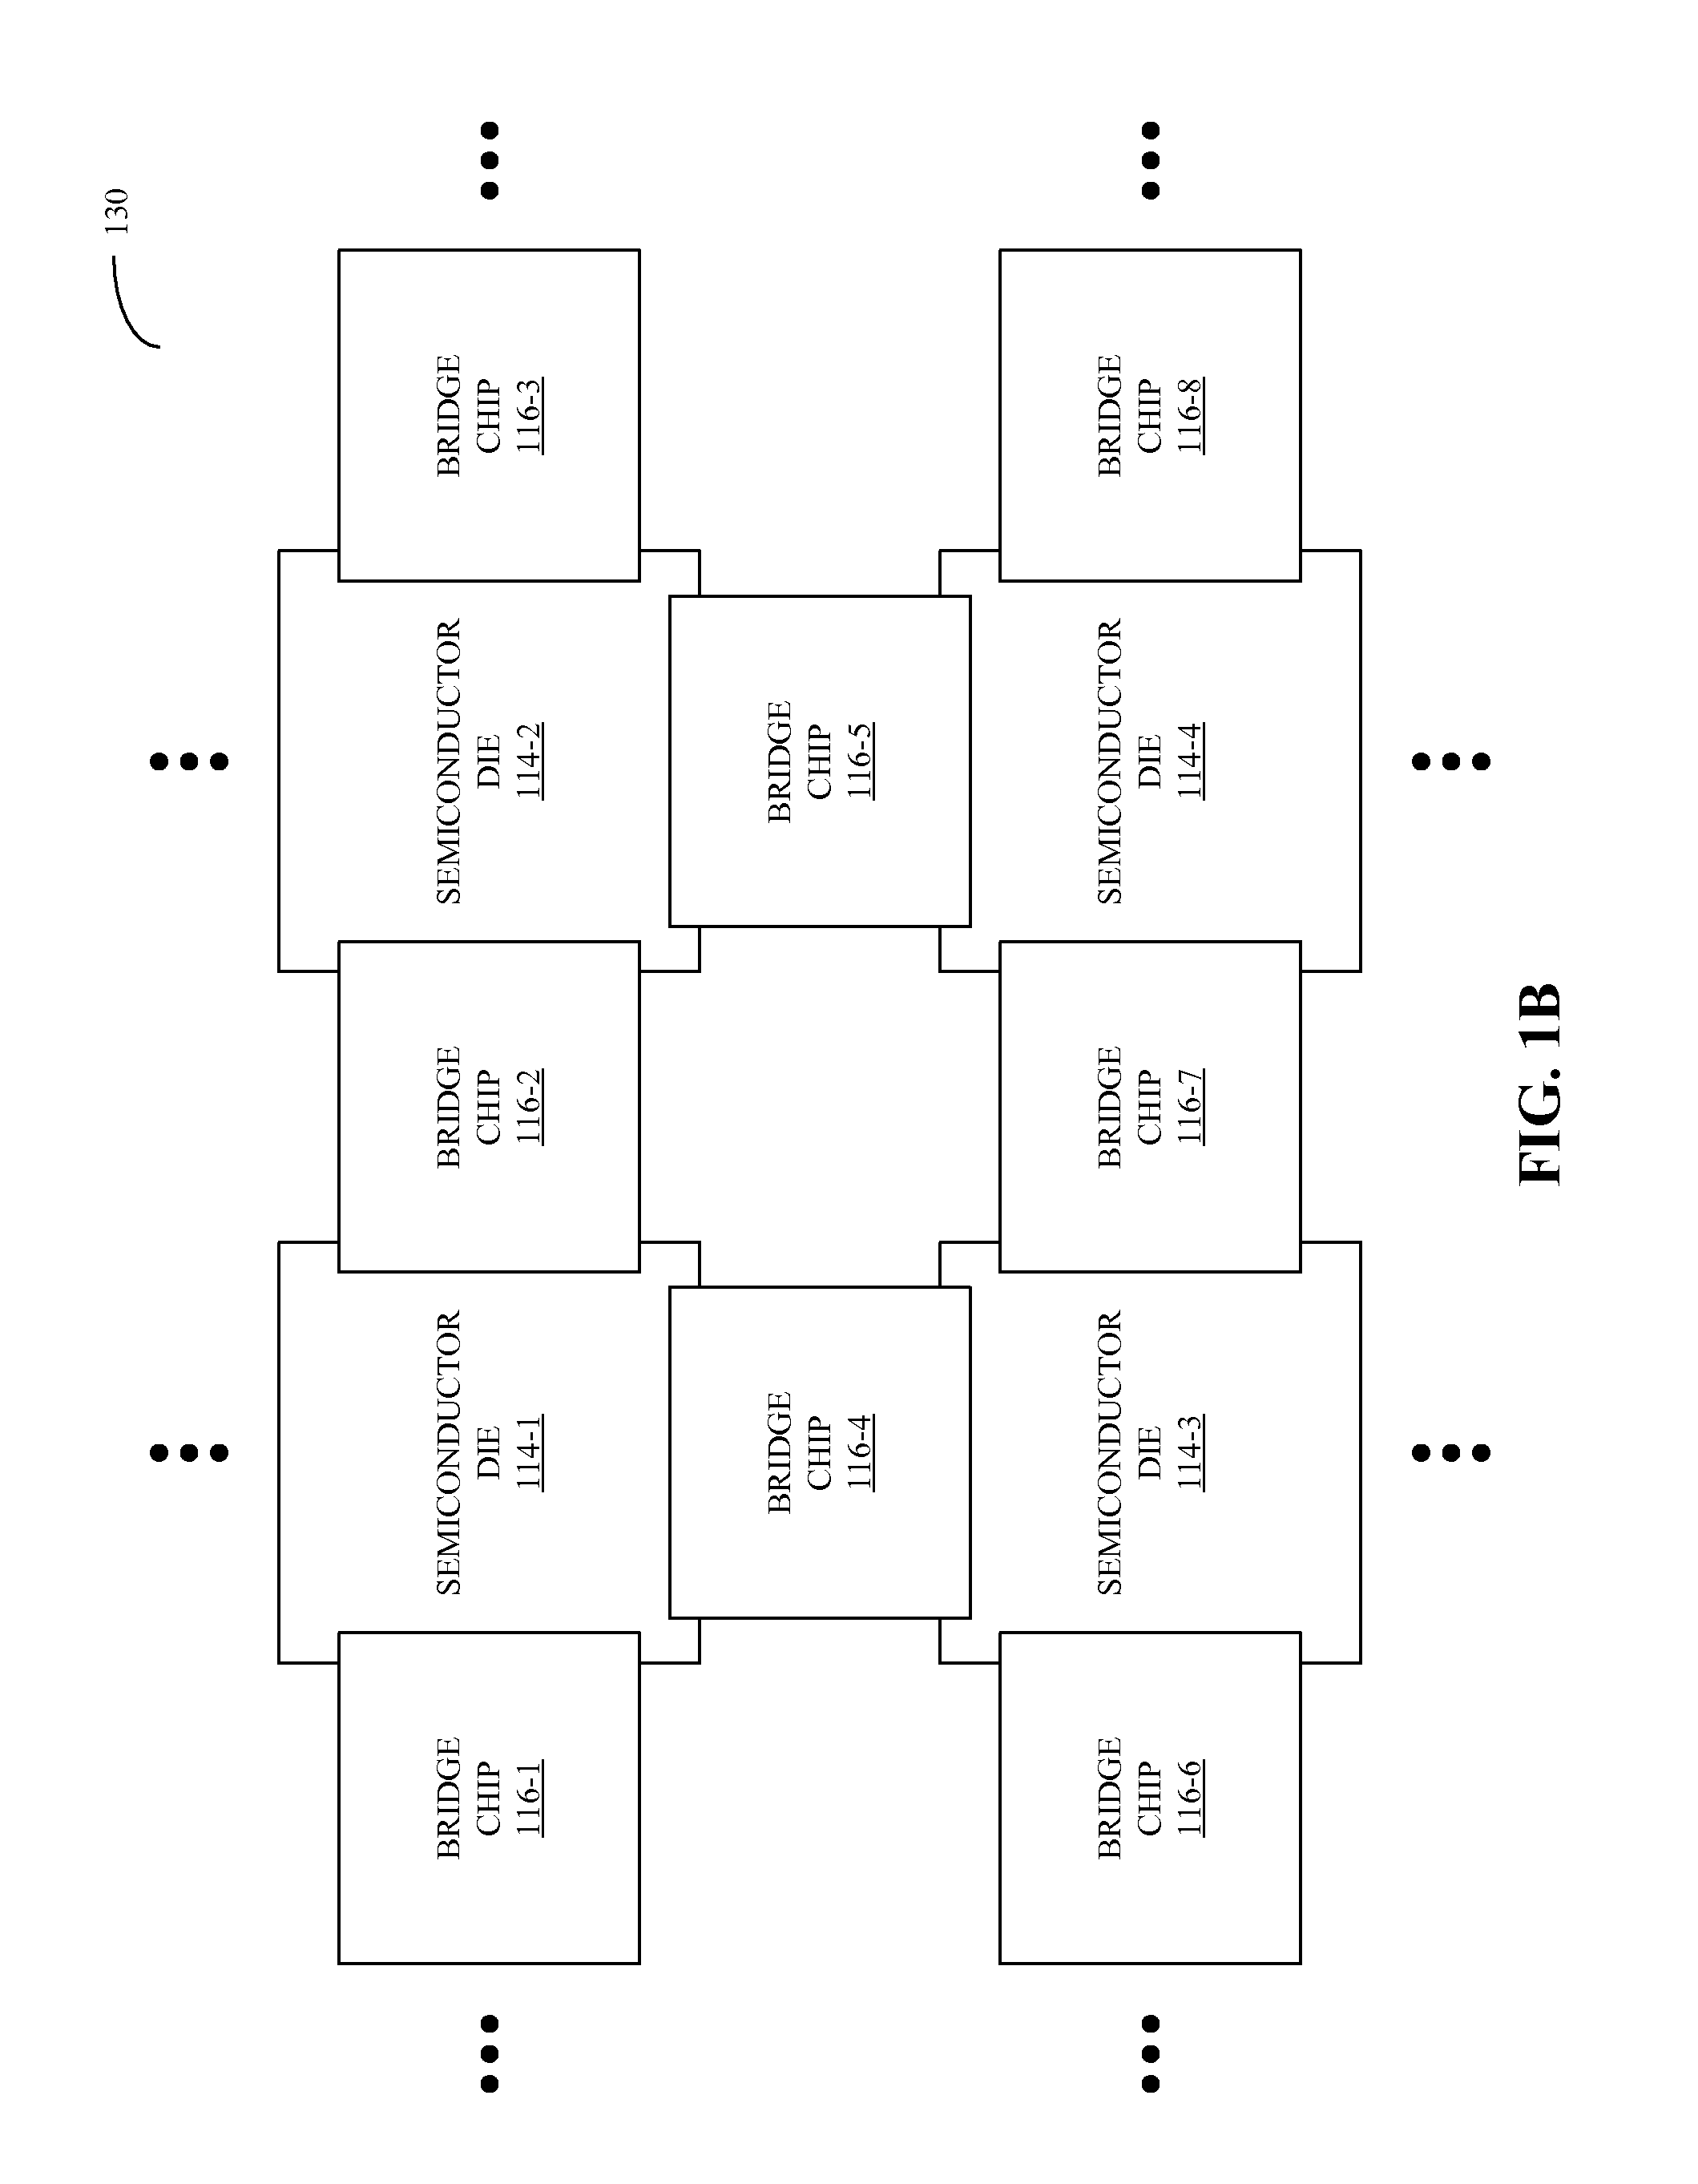 Optical-signal-path routing in a multi-chip system